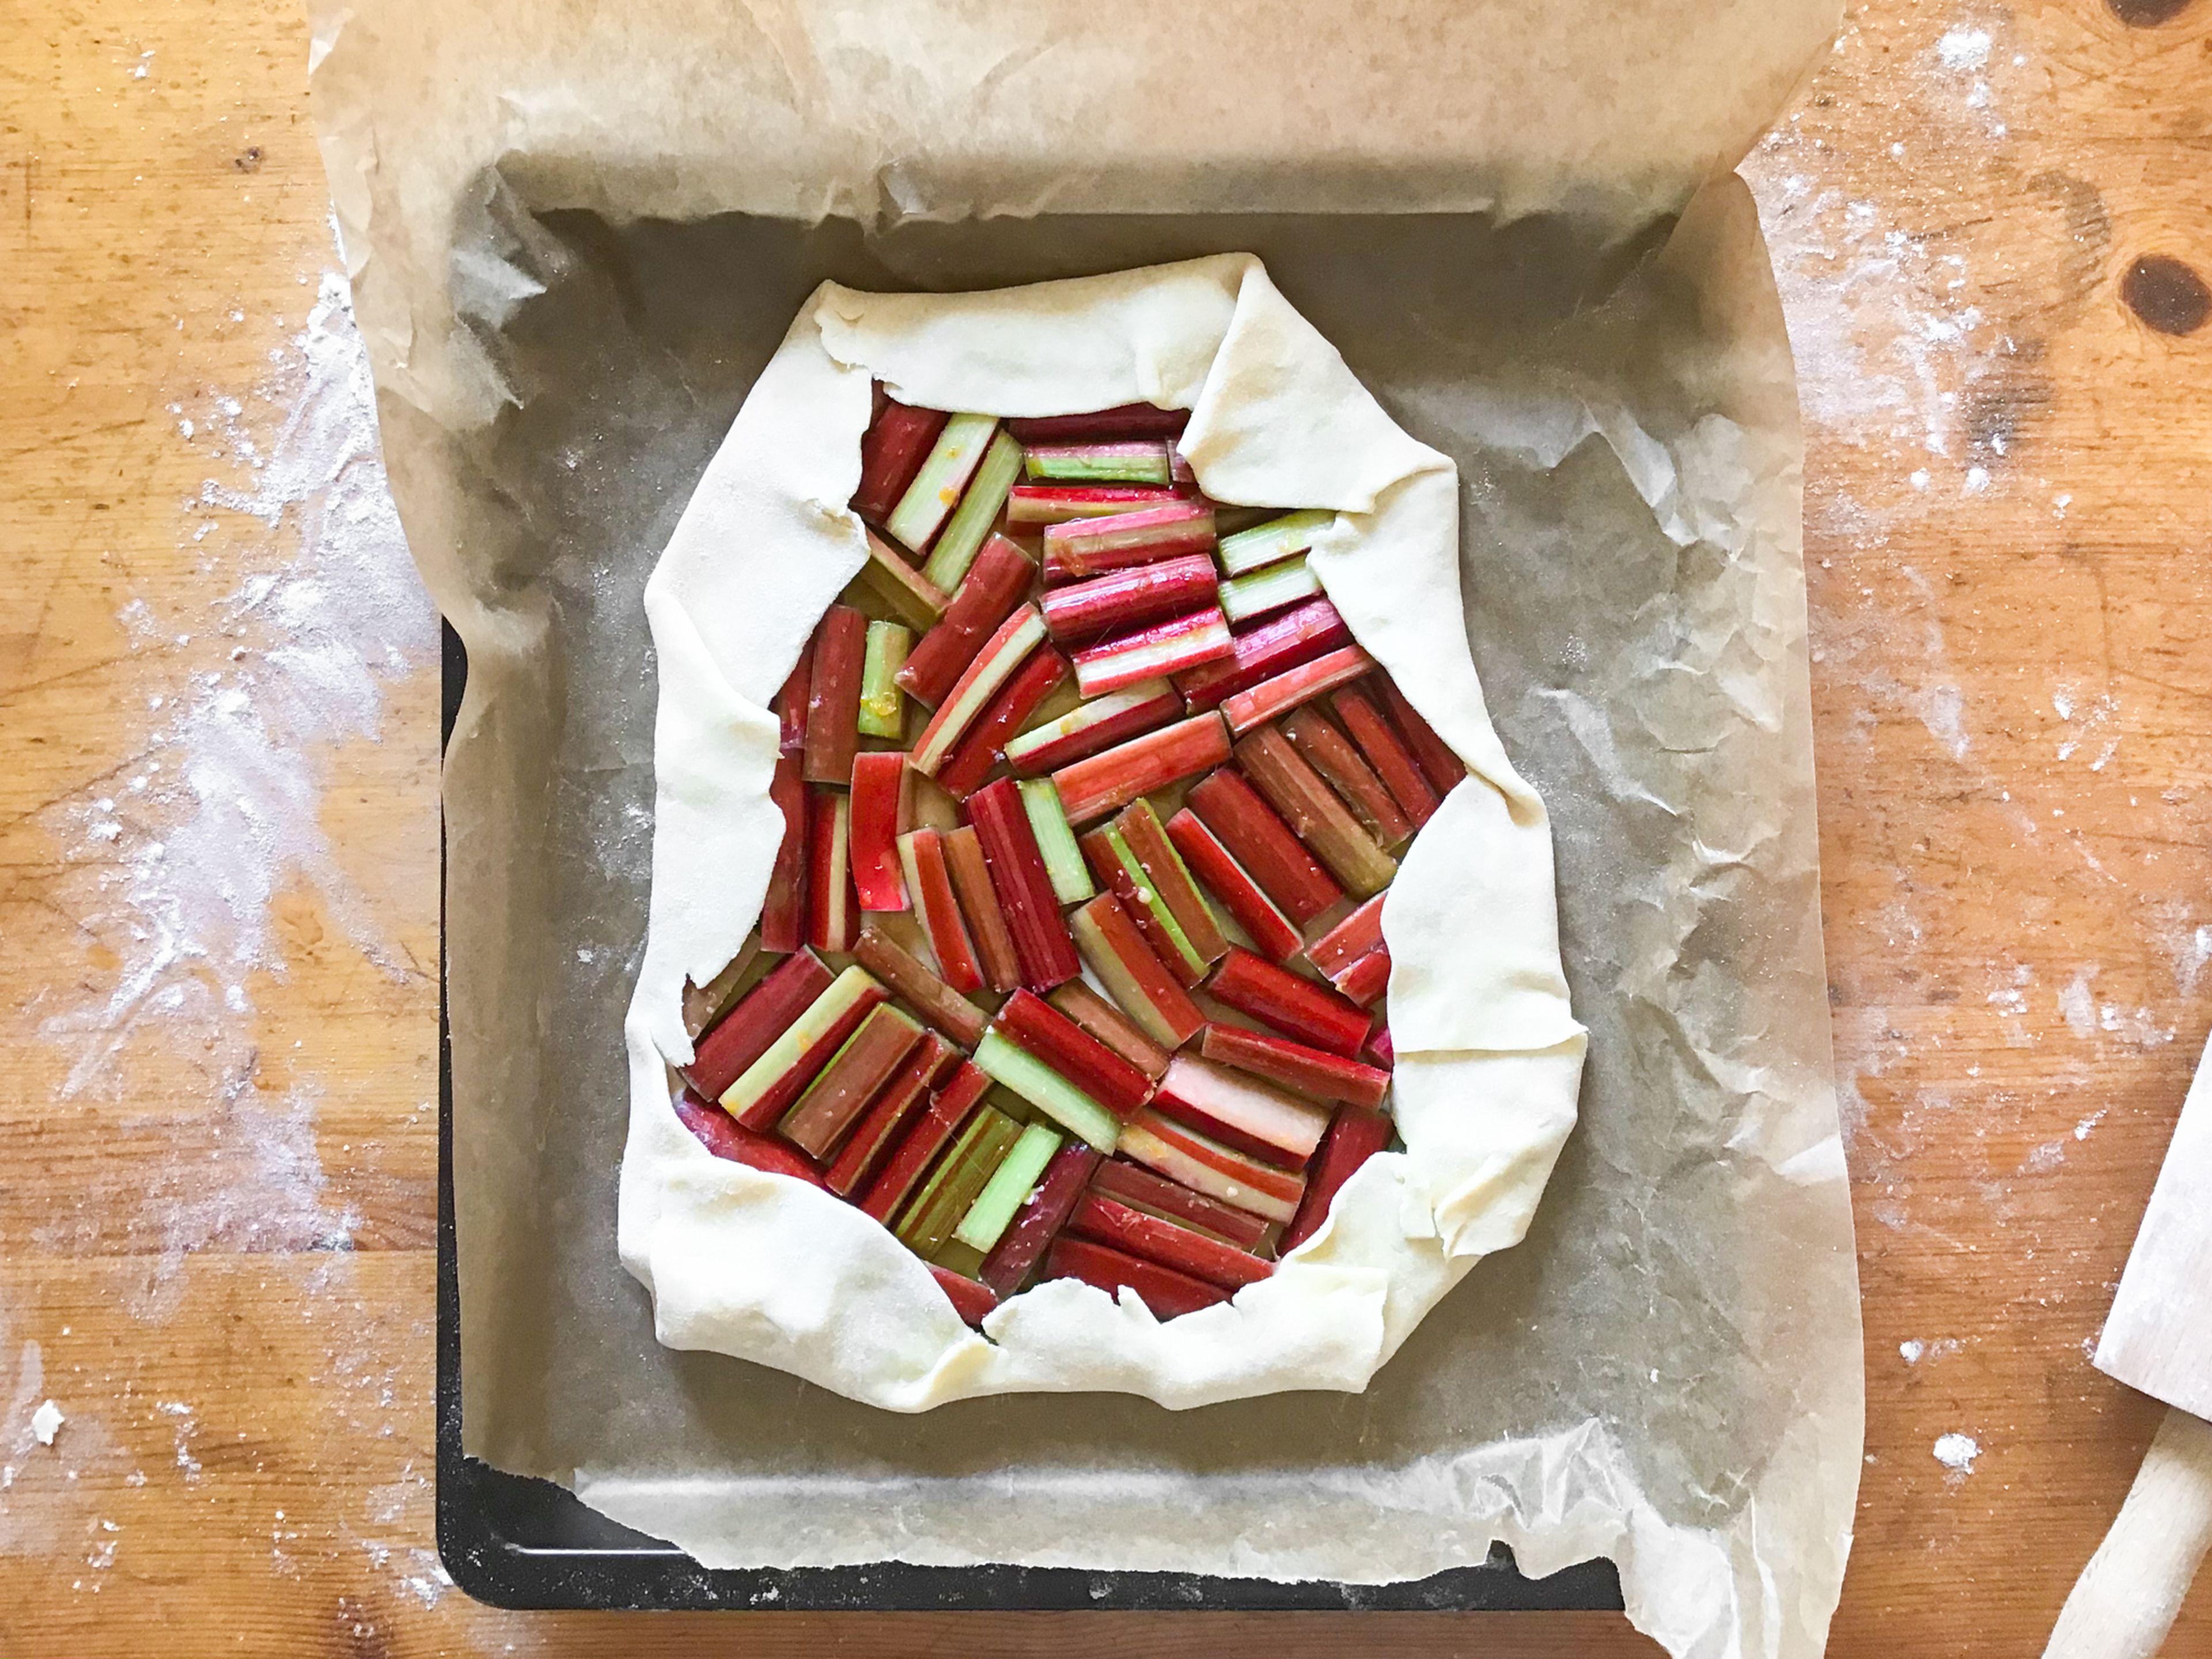 Now fold the edges of the dough over the rhubarb and crimp. The galette can look rustic and doesn’t need to have fussy clean edges.